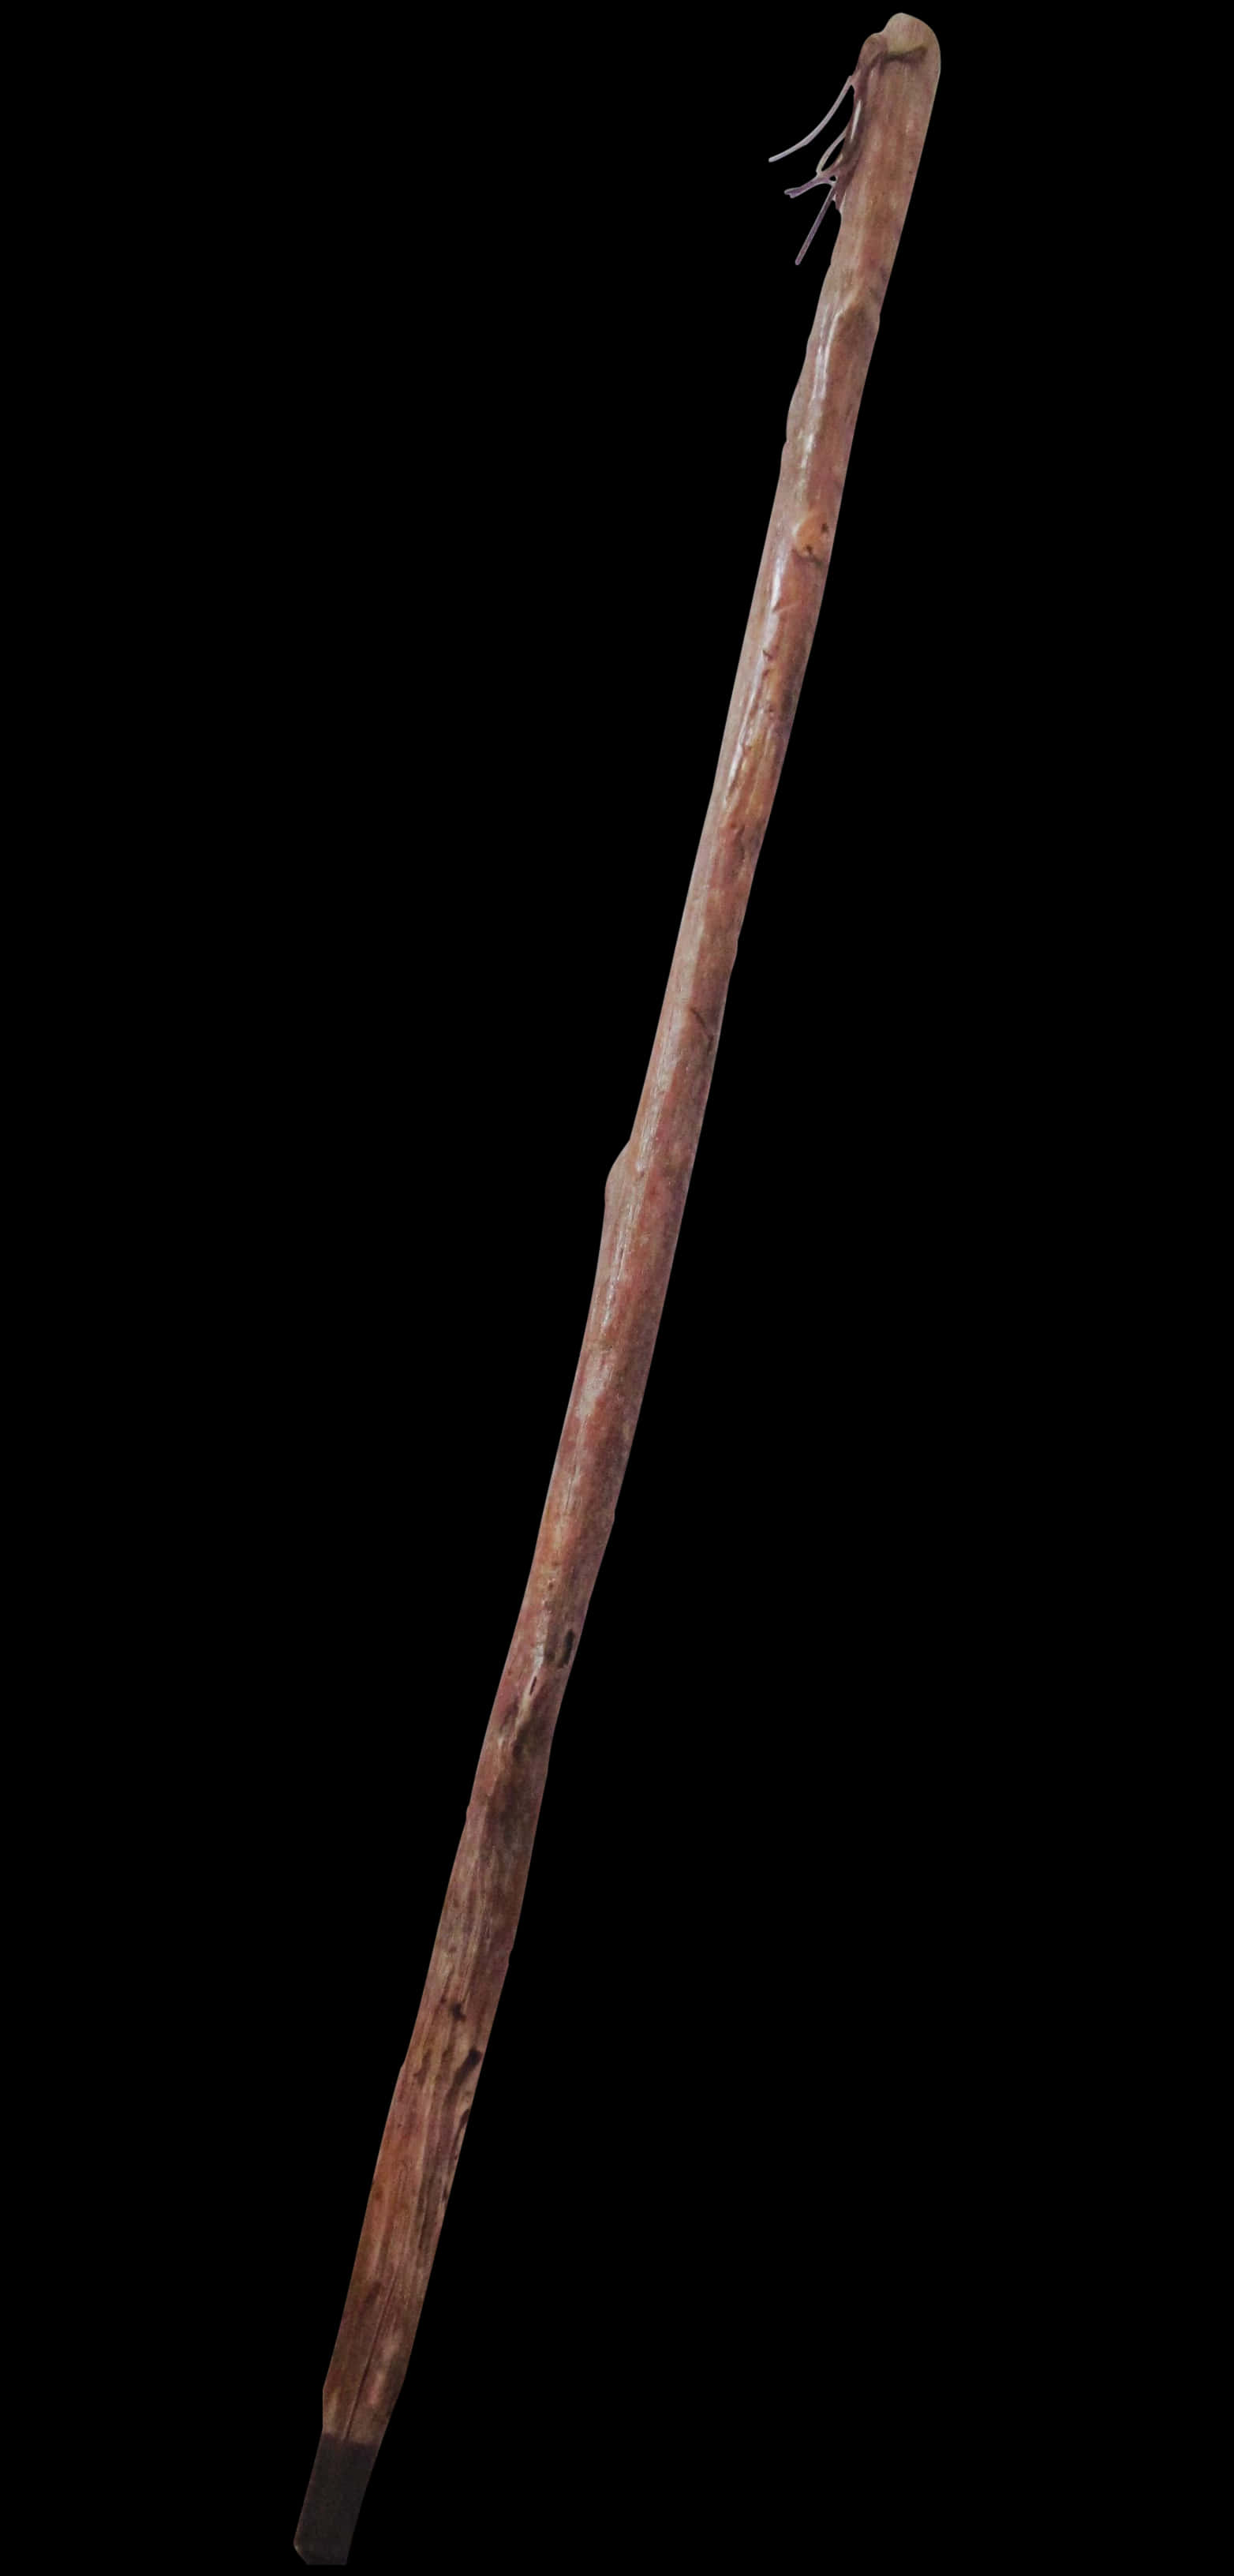 Wooden Stick Isolatedon Black Background PNG